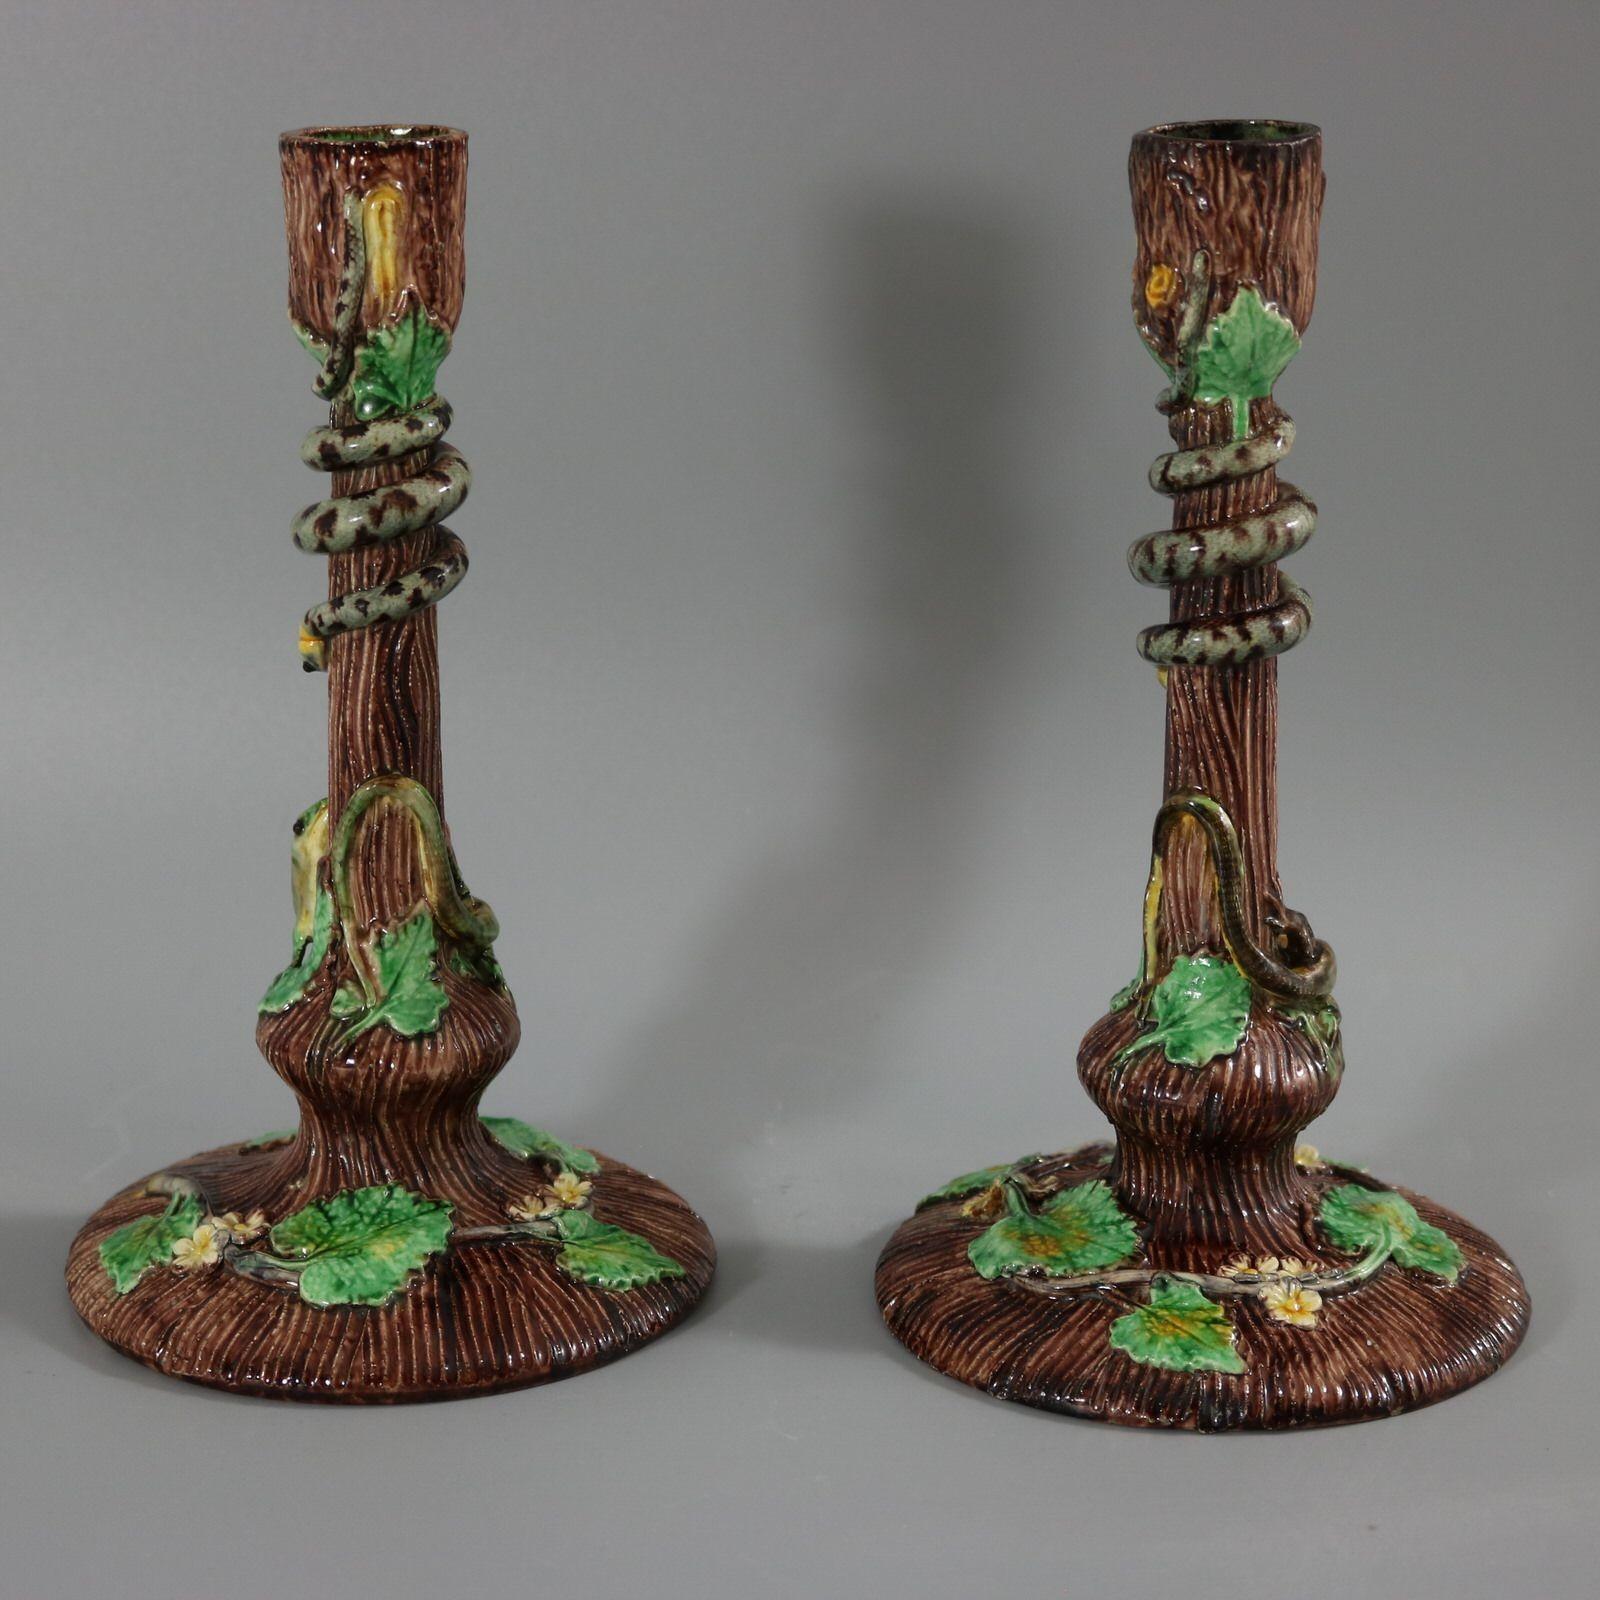 Pair of Thomas Sergent French Palissy Majolica candlesticks which feature blossom and leaves around the base. A lizard peering up at a snake to the stem. Colouration: brown, green, grey, are predominant. The piece bears maker's marks for the Thomas